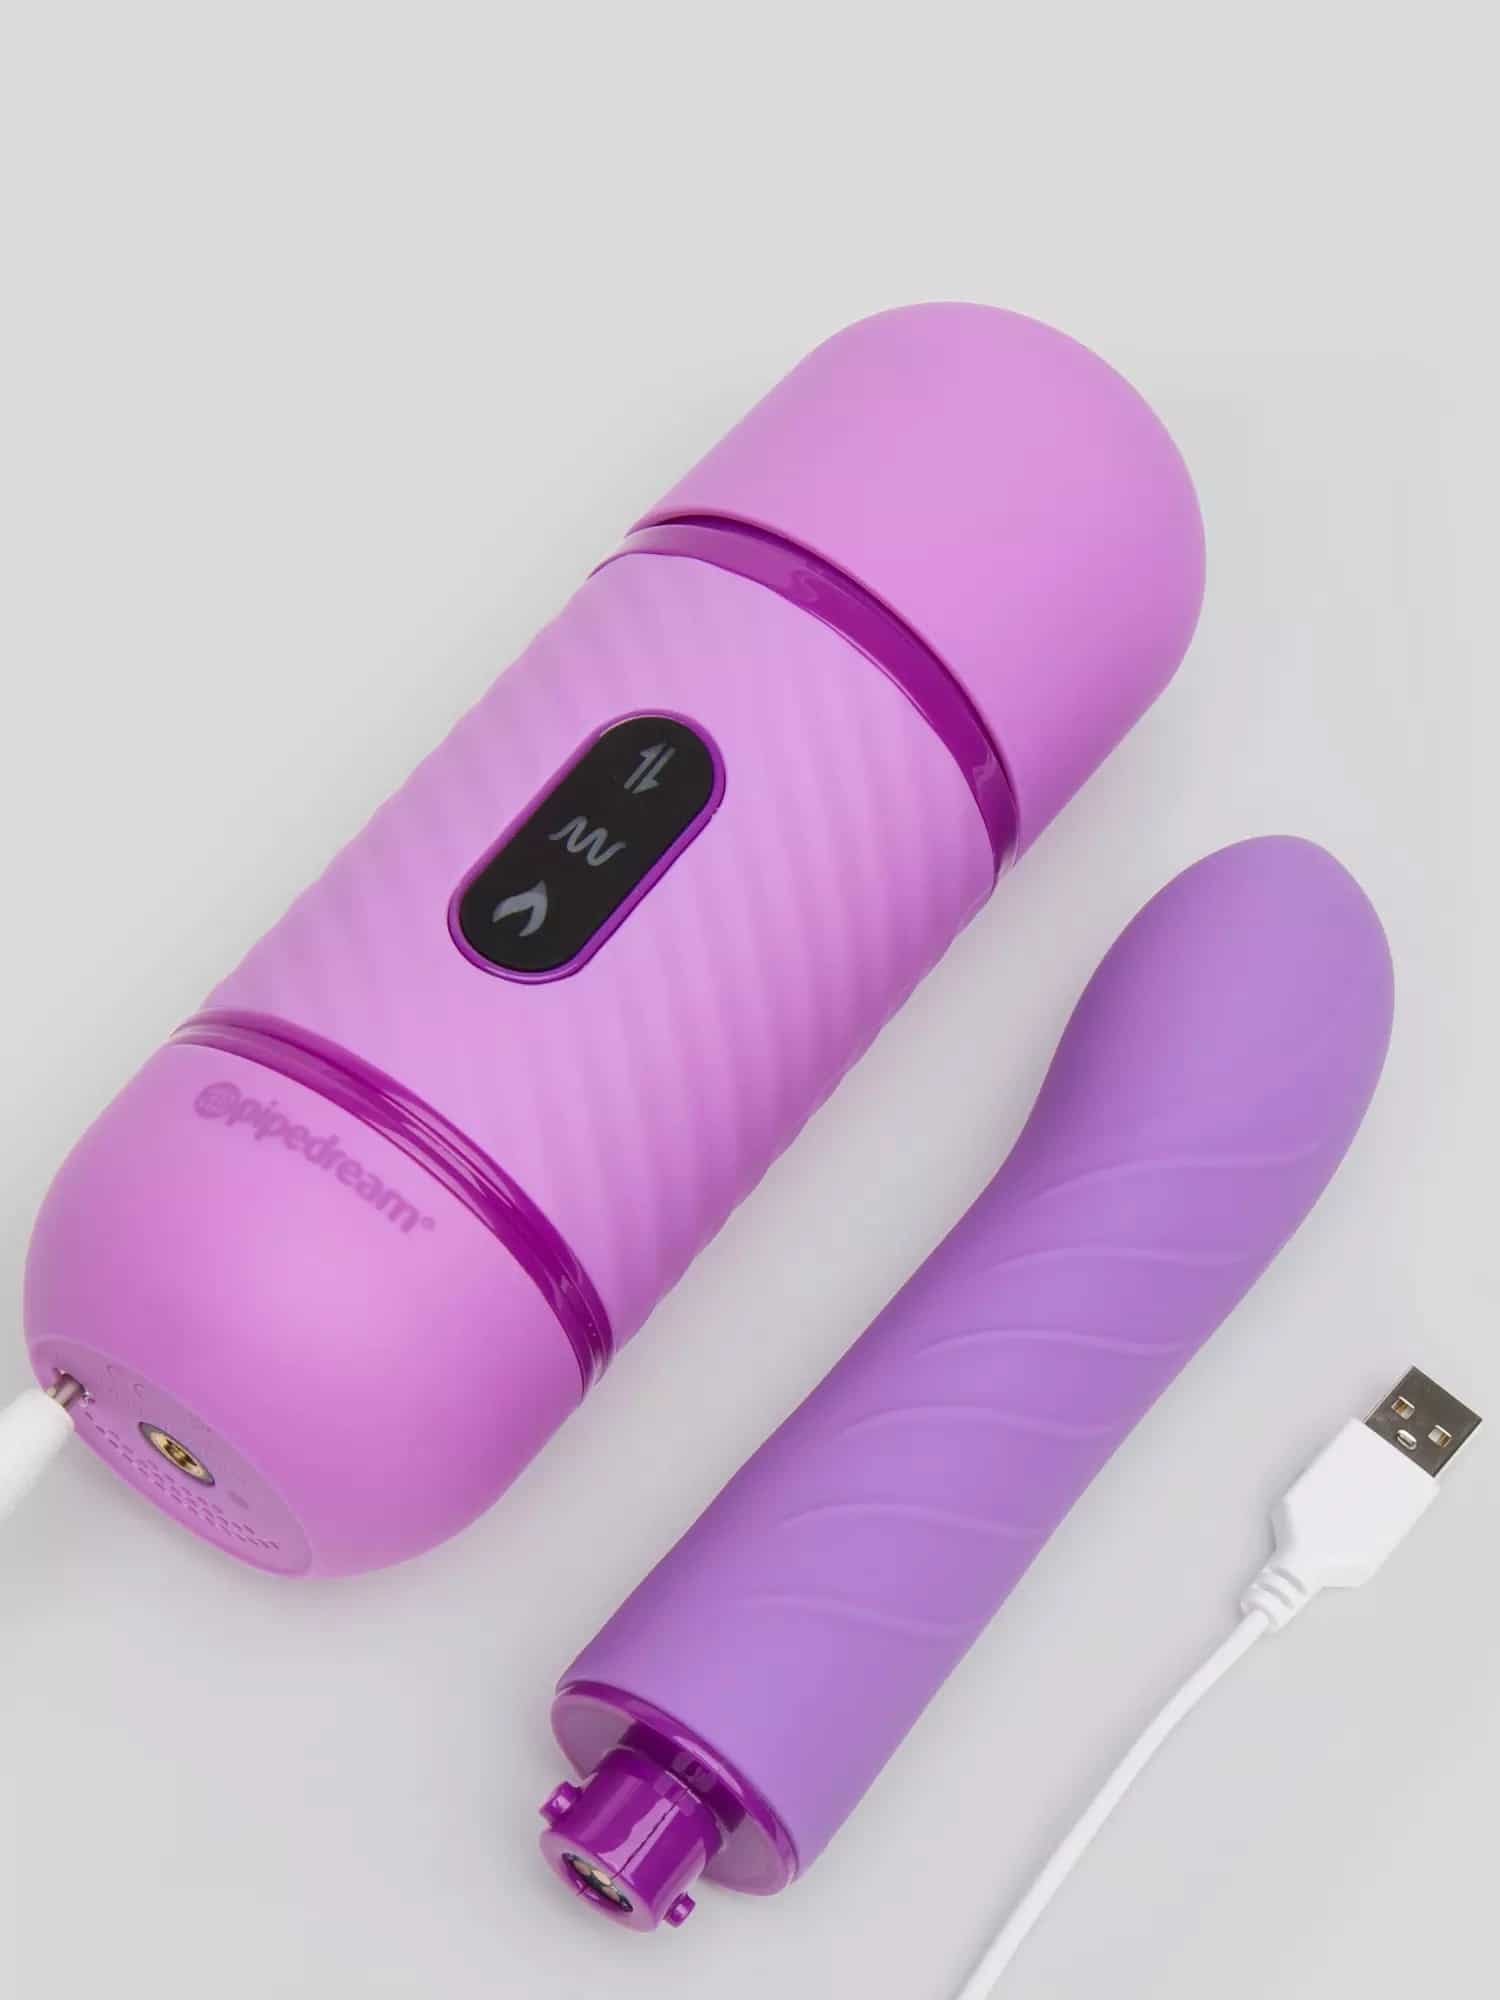  Fantasy For Her Rechargeable Remote Control Sex Machine . Slide 4